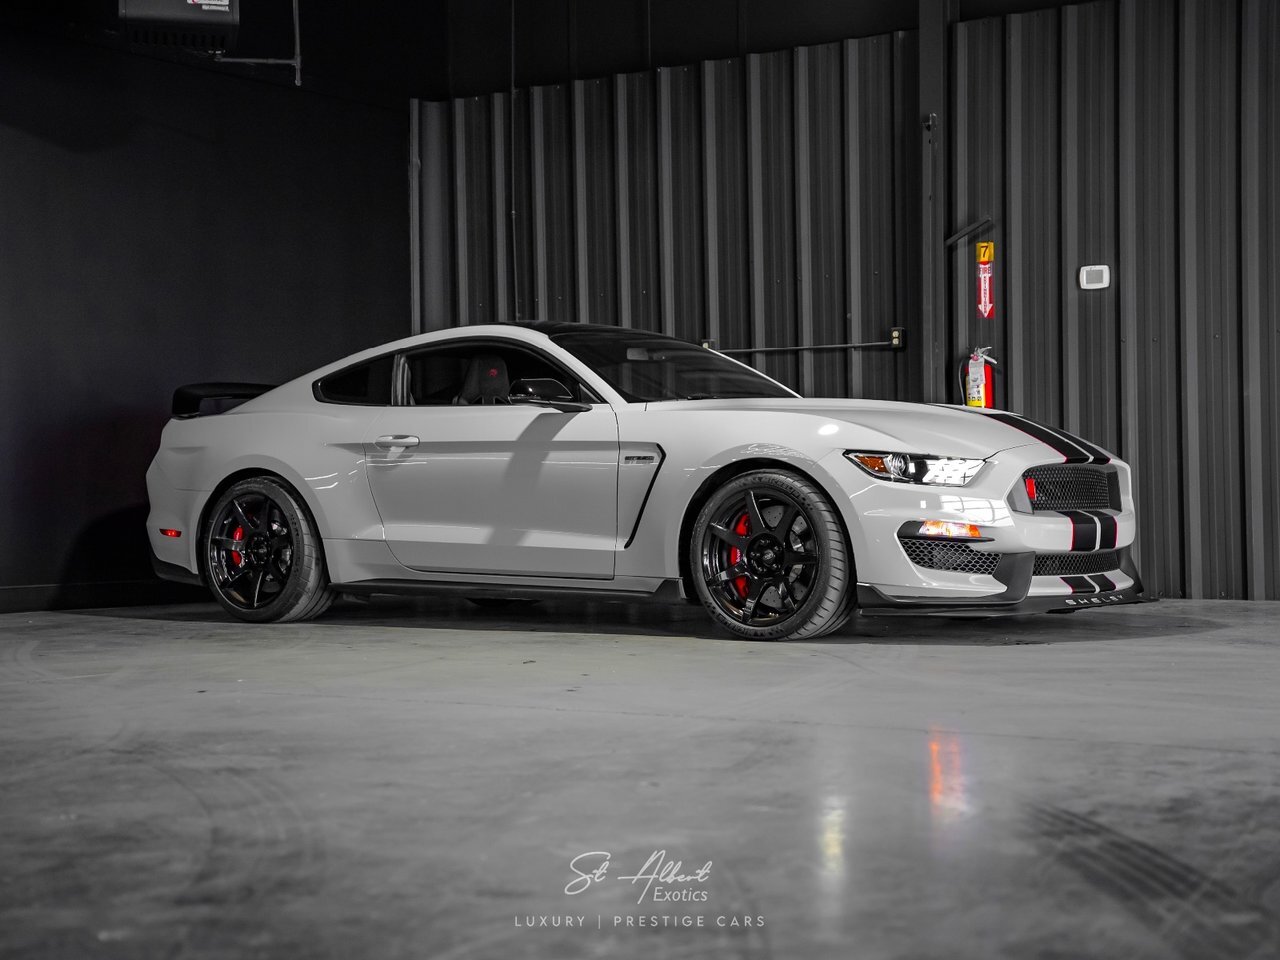 2017 Ford Mustang Shelby GT350R 6SPEED MANUAL | Carbon Fiber Rims | 